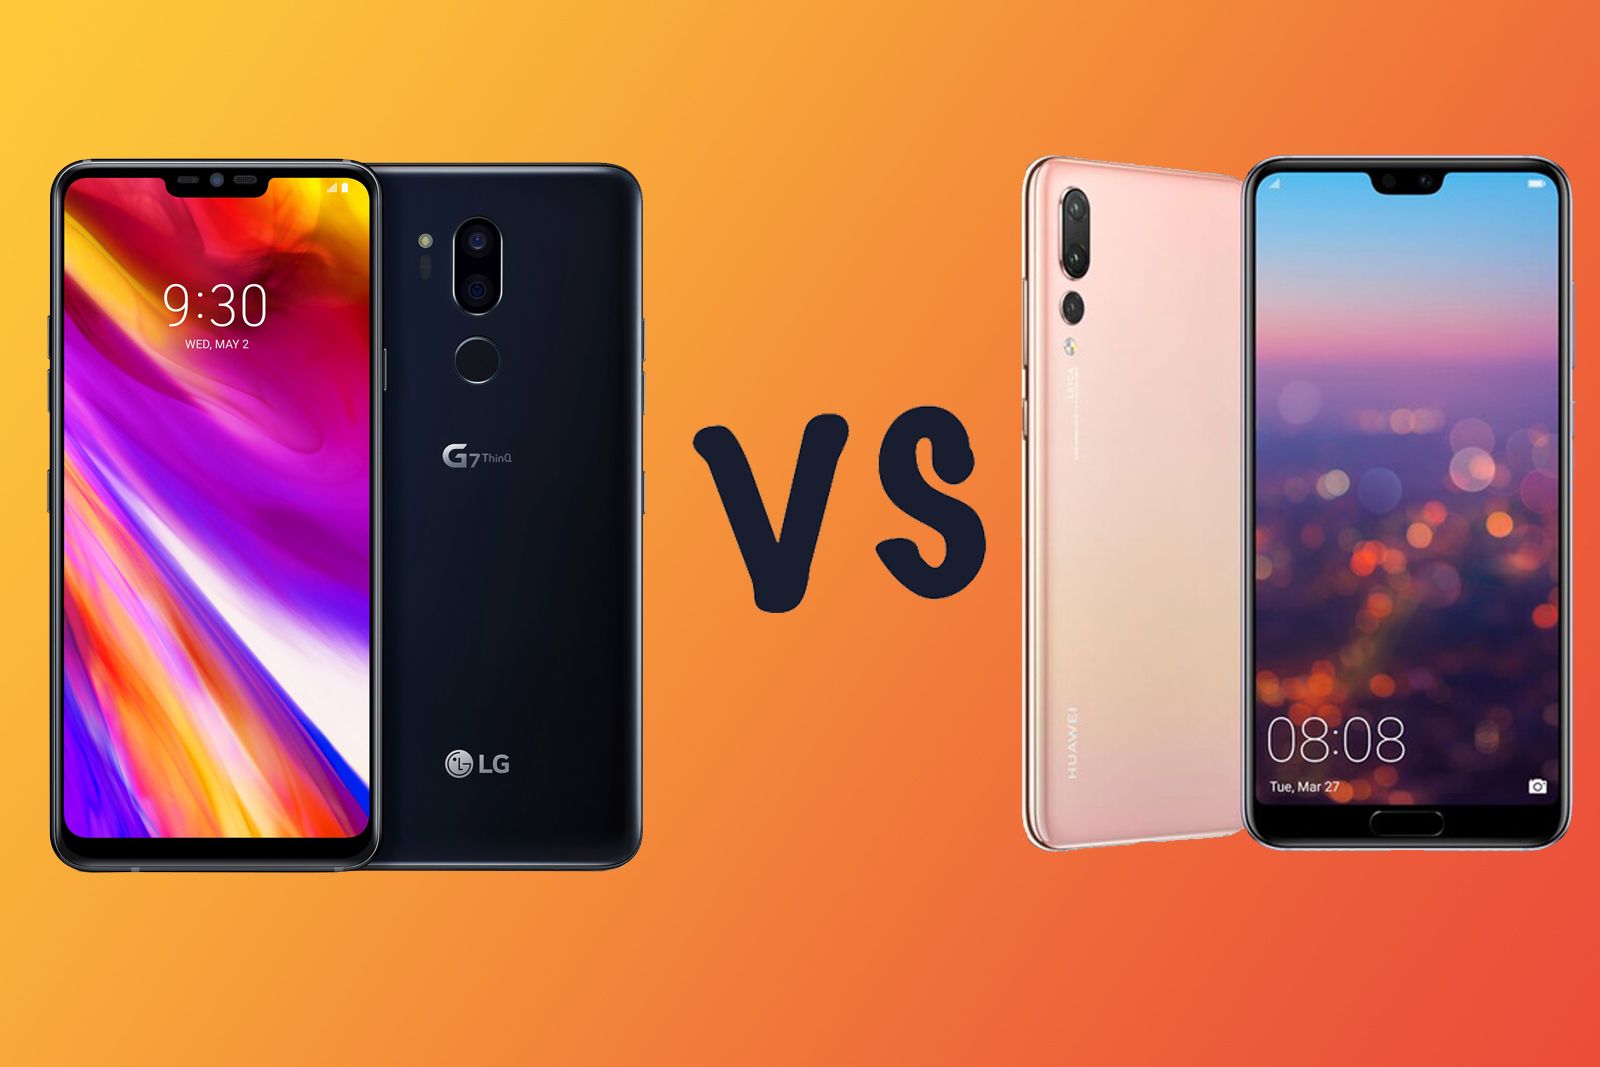 LG G7 ThinQ vs Huawei P20 Pro Whats the difference image 1